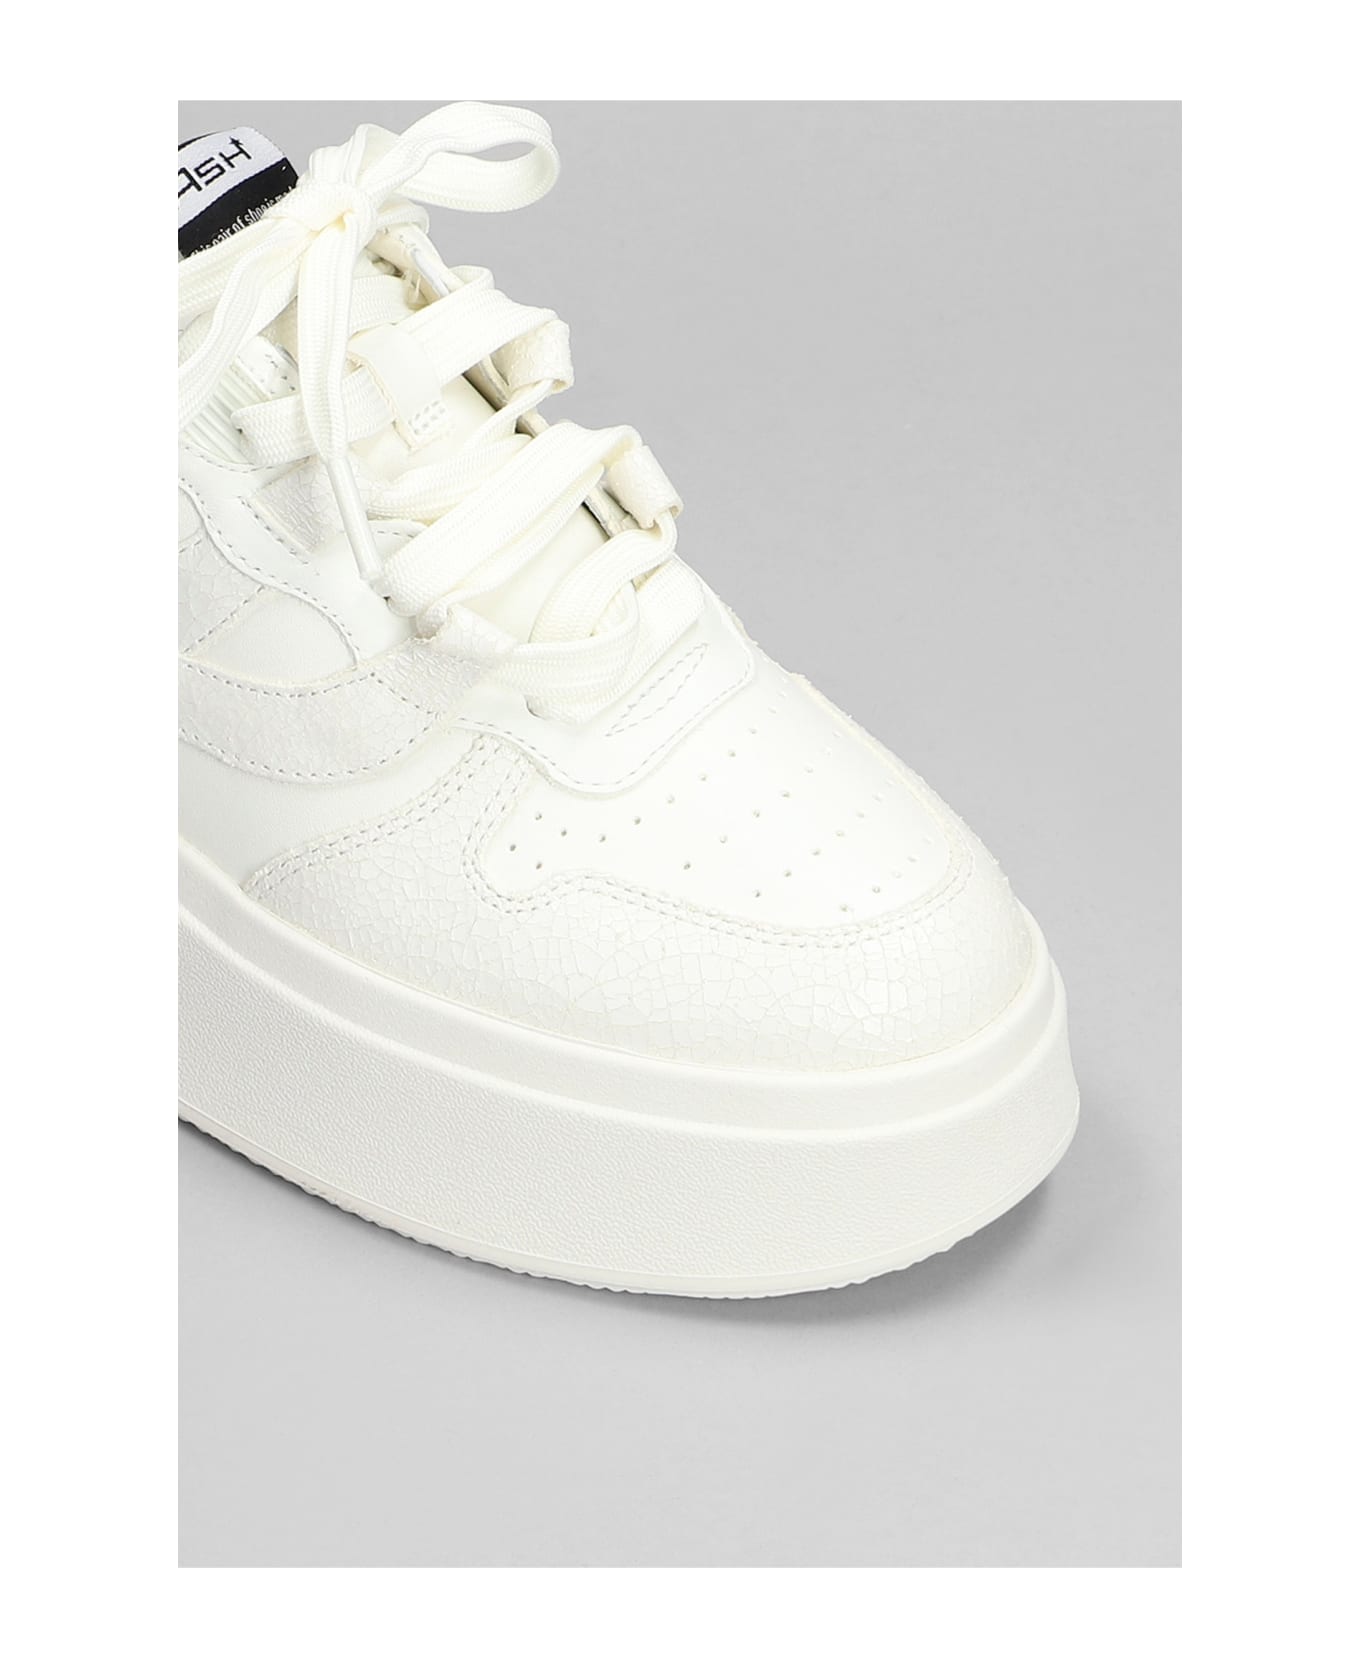 Ash Match Sneakers In White Leather - white